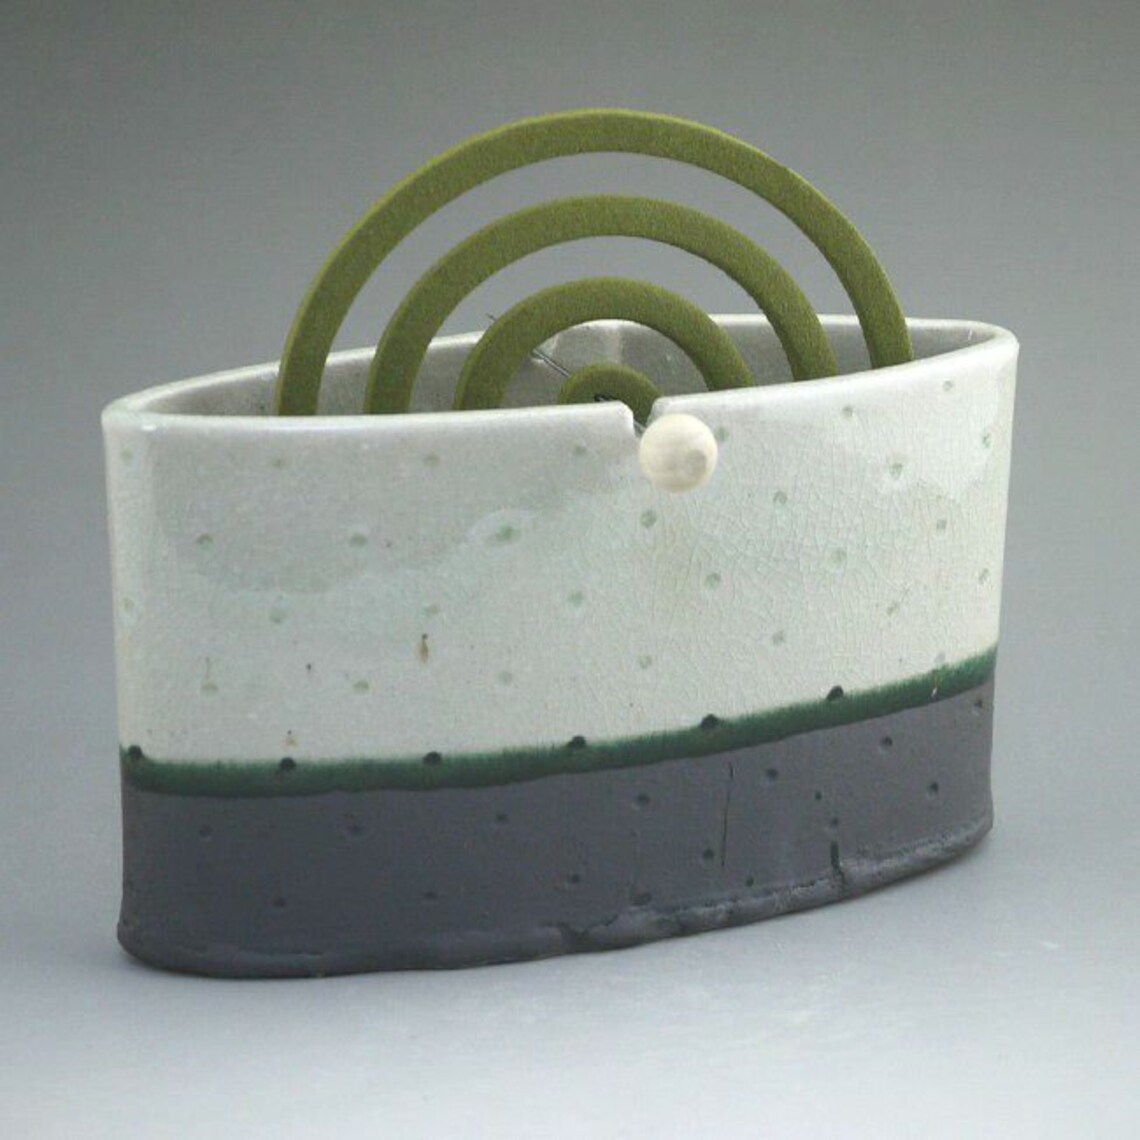 Mosquito Coil Stand Black and Whitemosquito Repellent Made in - Etsy